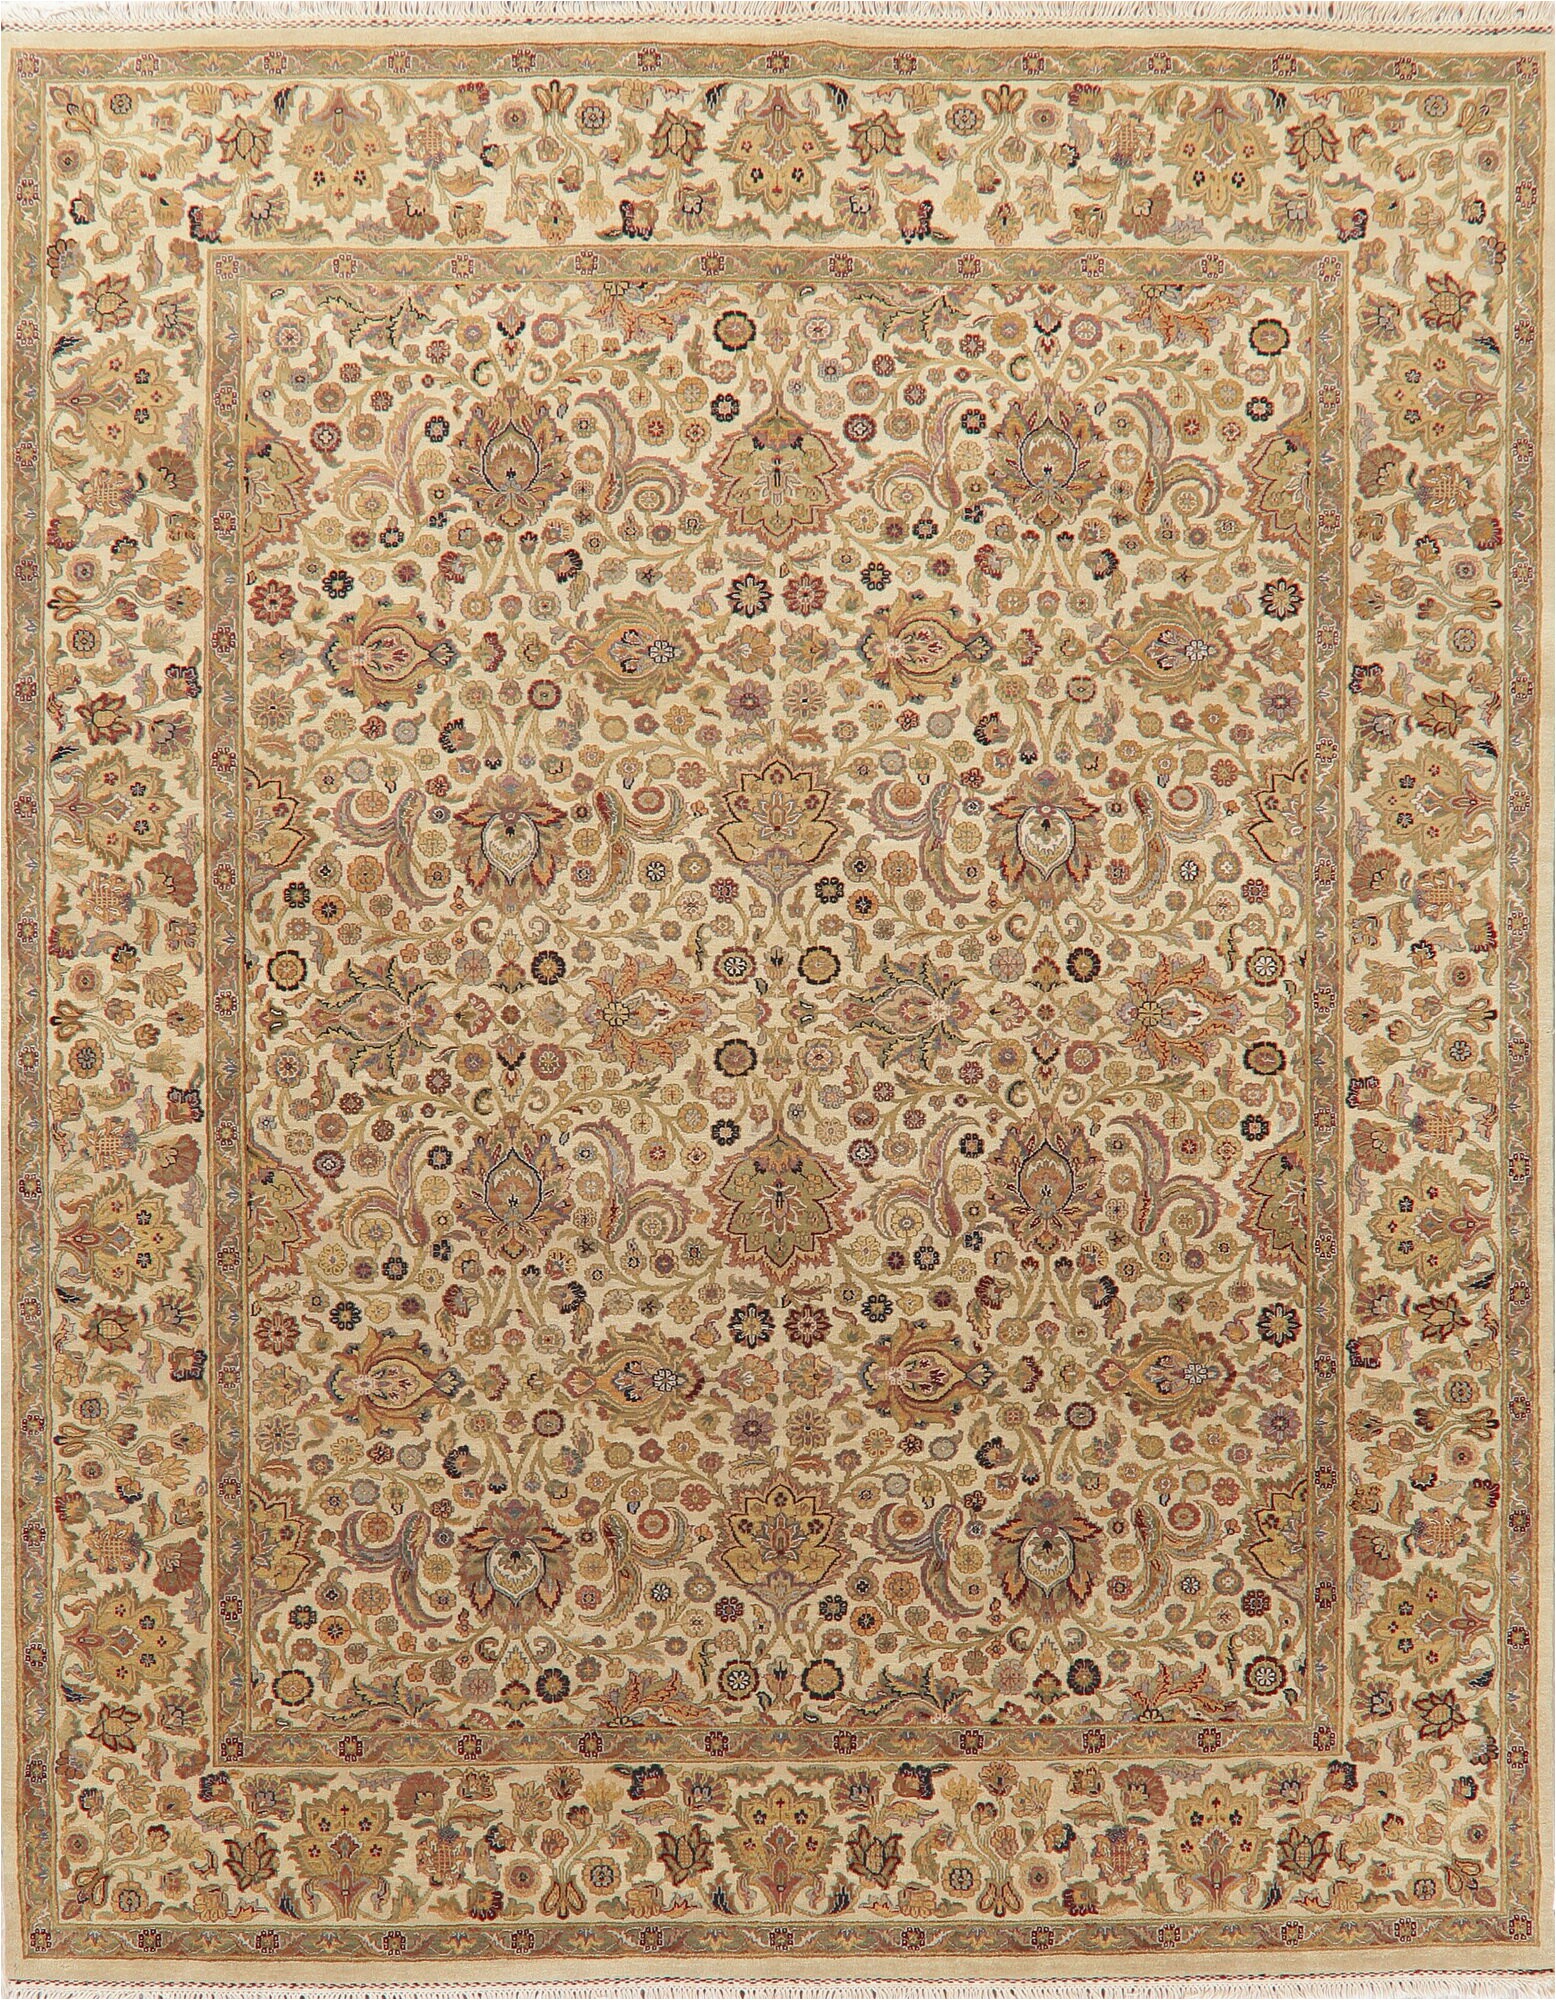 Naomi Tufted Wool area Rug E Of A Kind Naomi All Over Floral Hand Knotted 8 X 10 1" Wool Brown area Rug